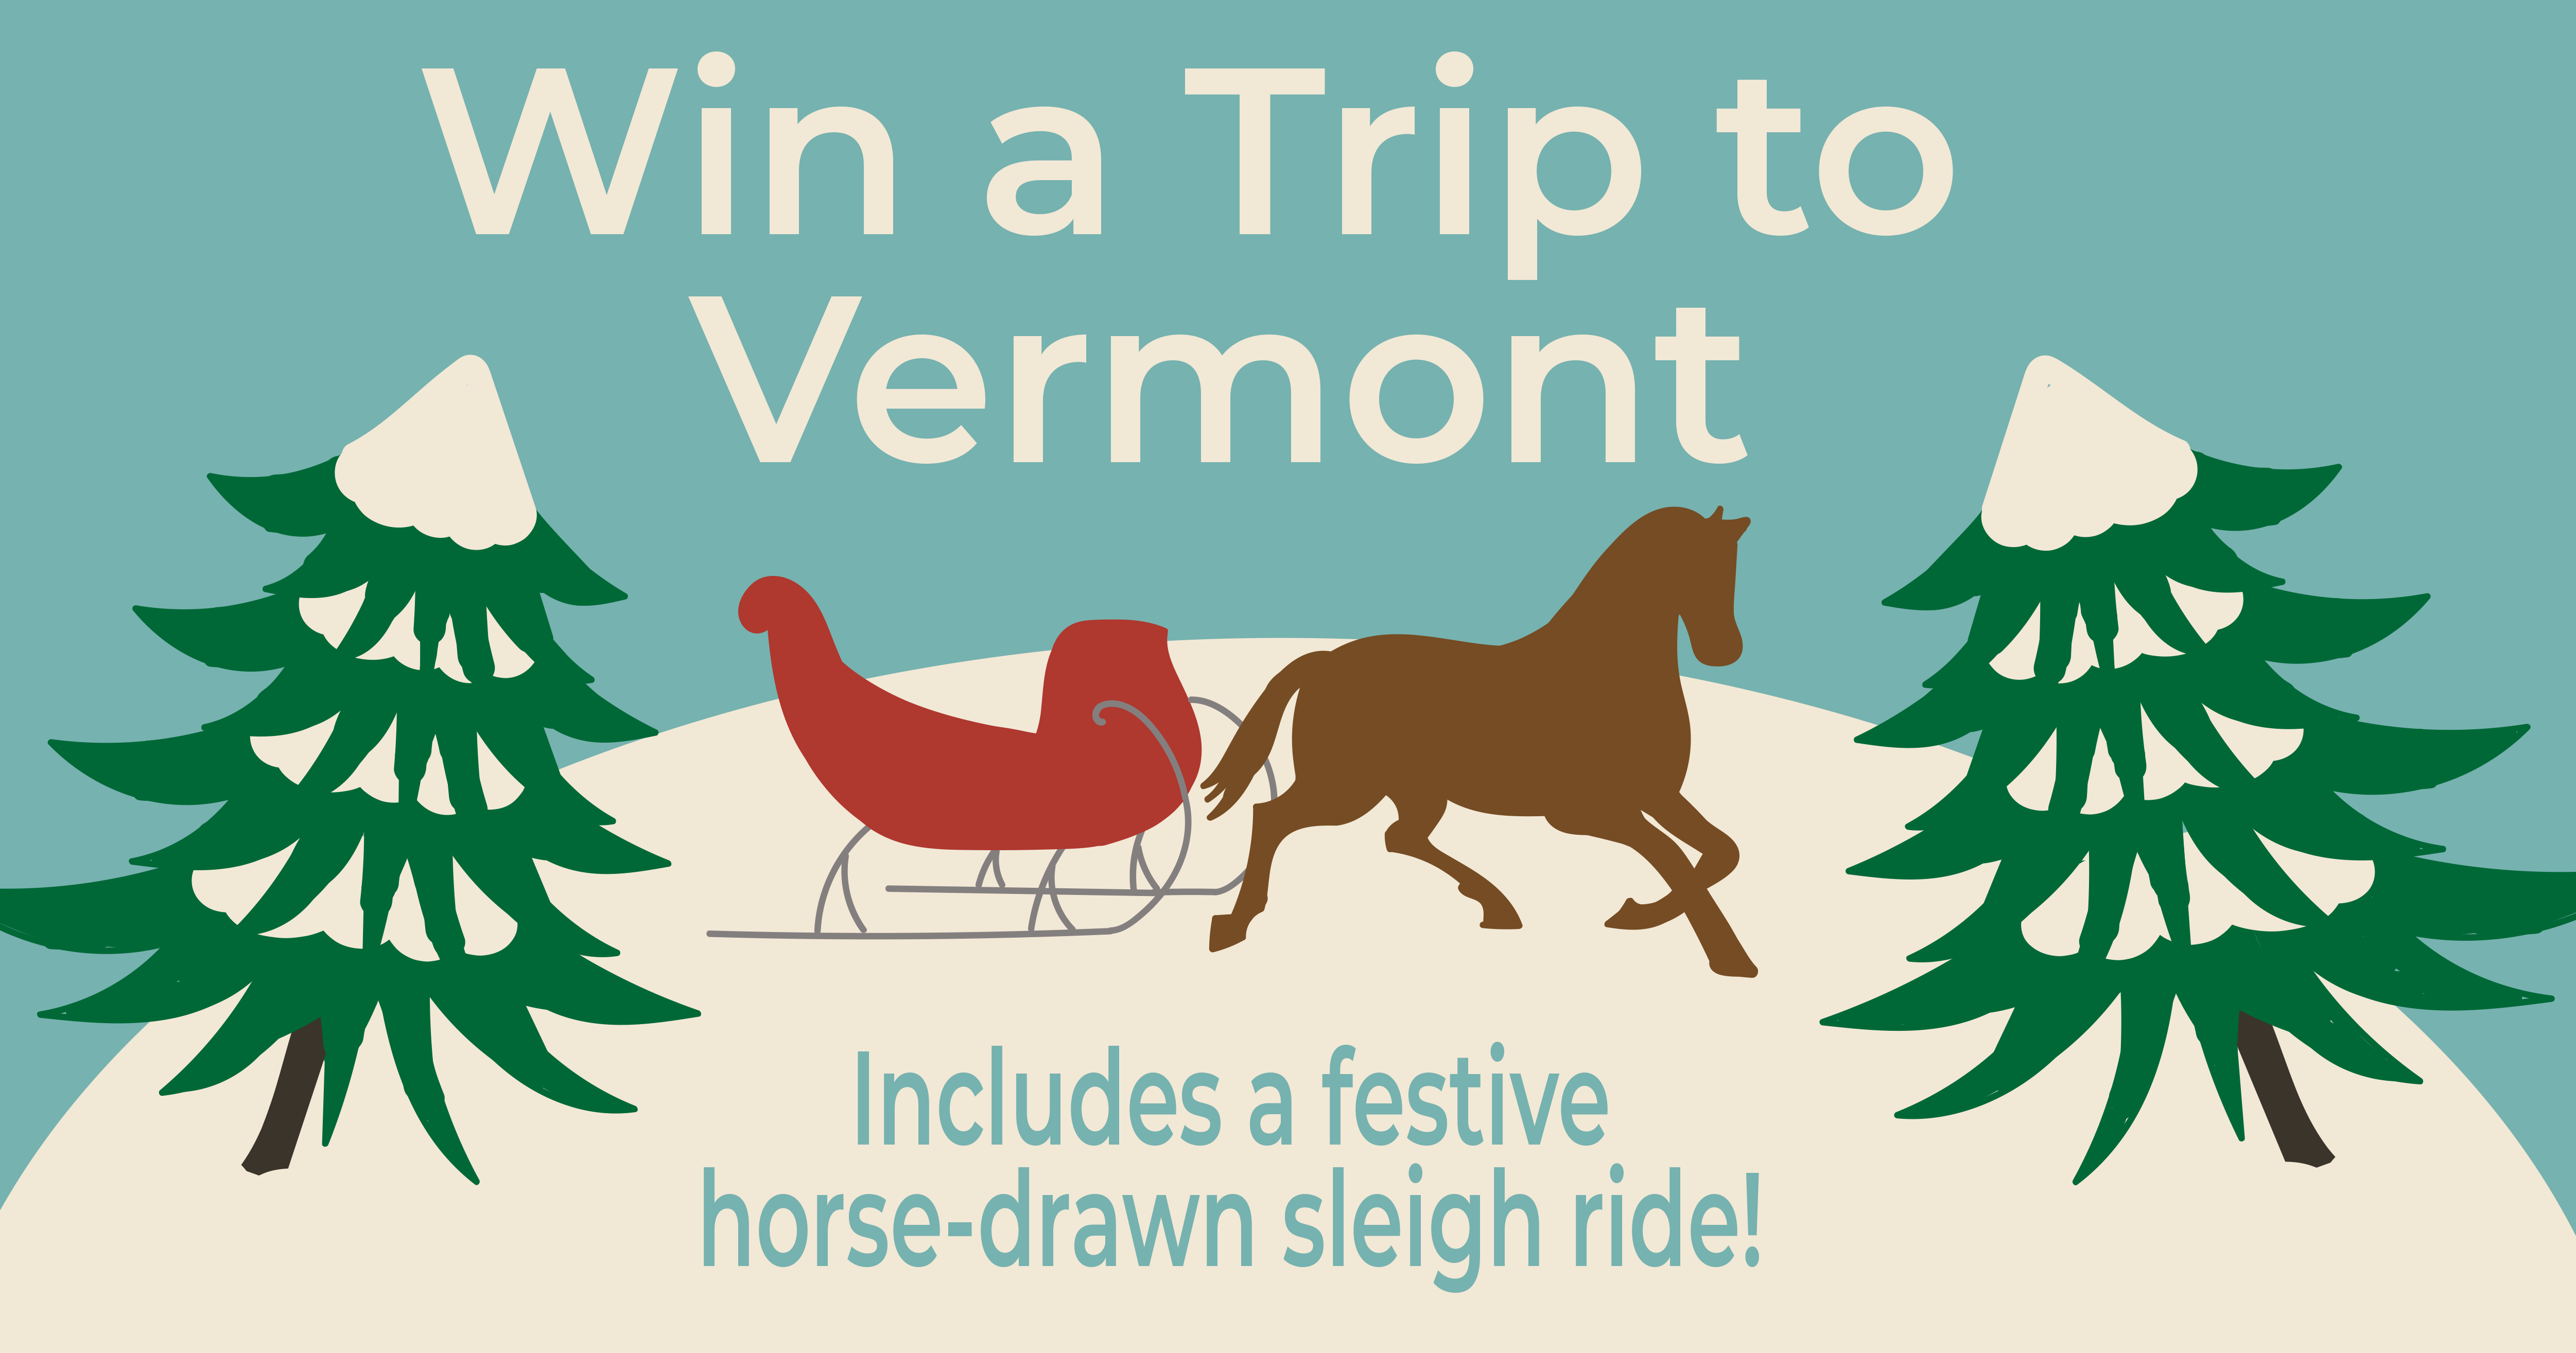 Win A Trip To Vermont! Includes a festive horse-drawn sleigh ride - WERS 88.9FM Live Music Week